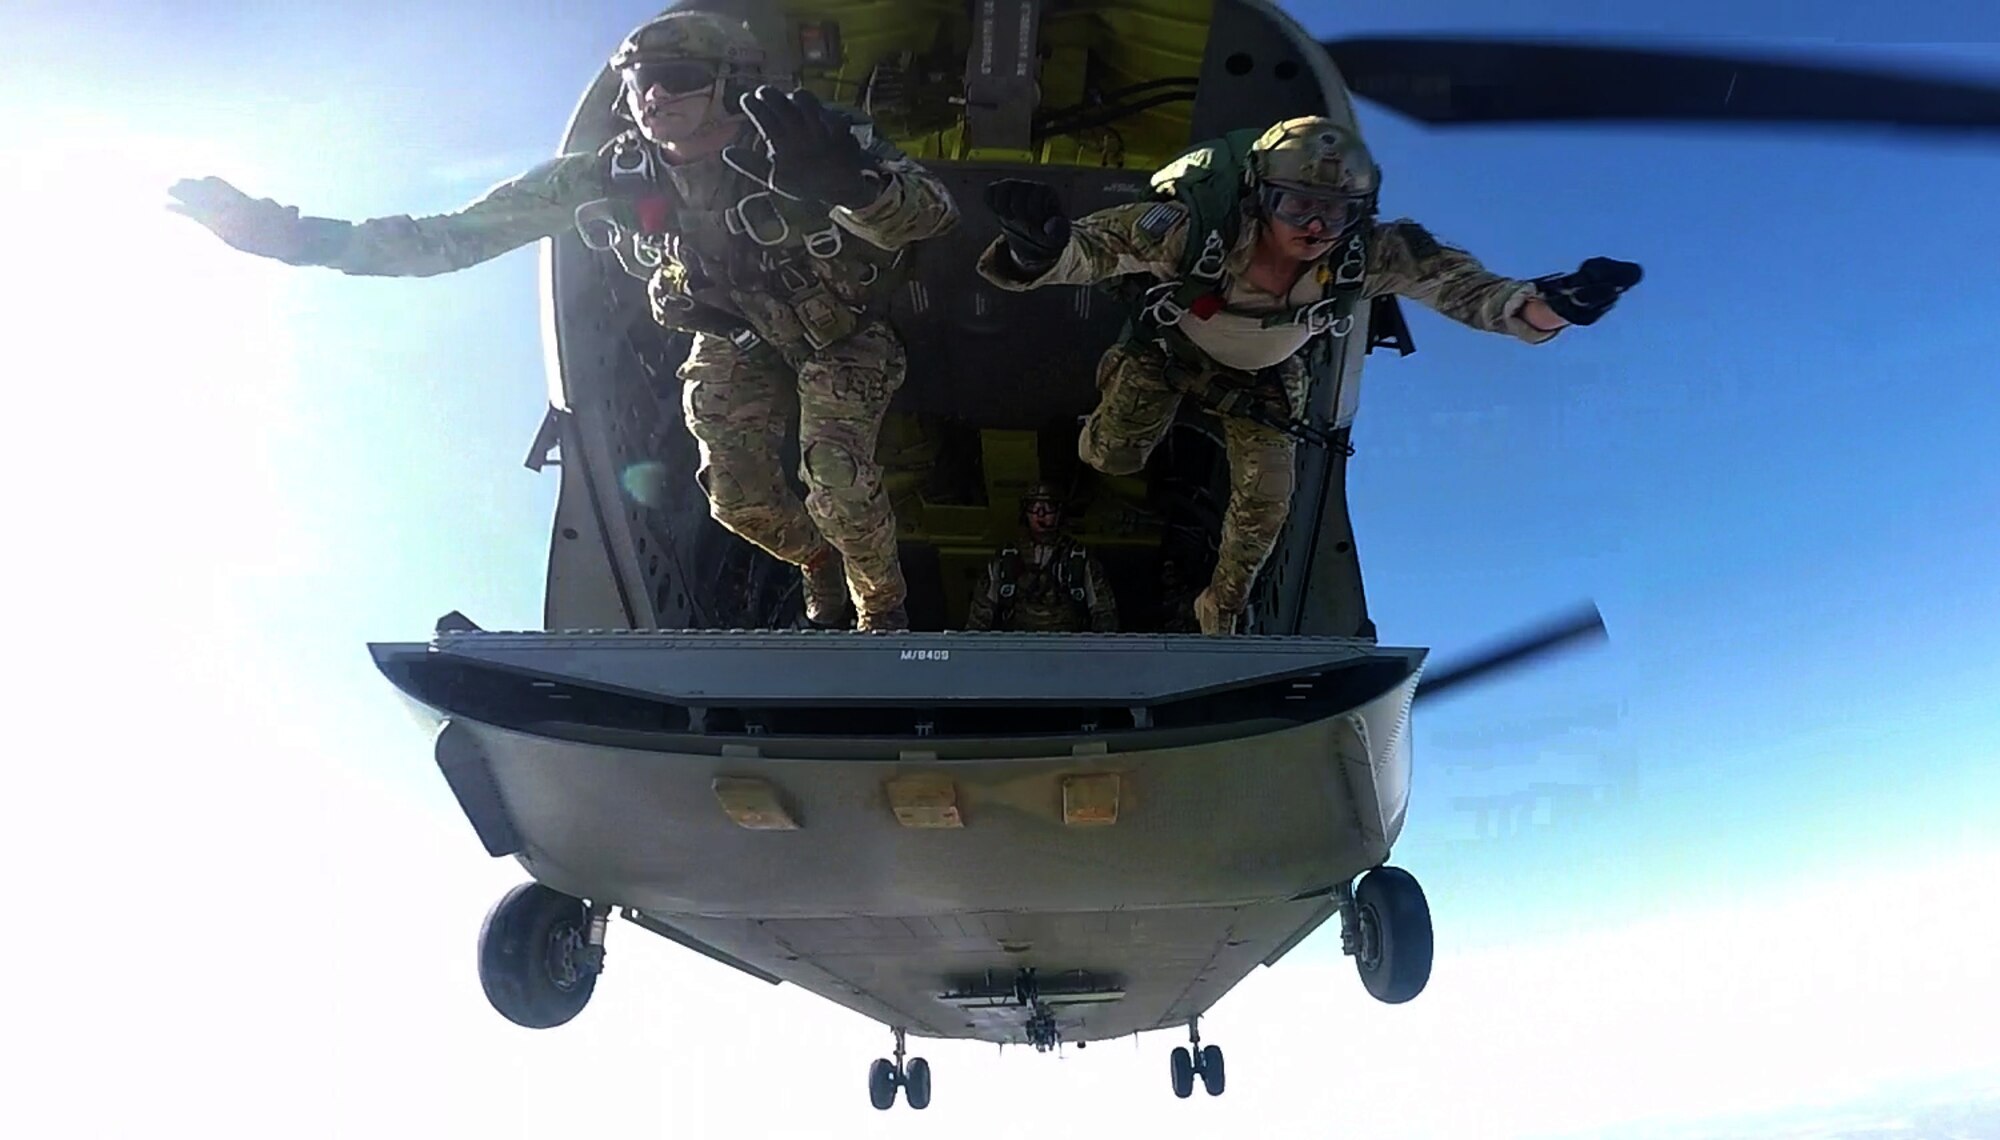 U.S. Air Force Special Tactics Airmen assigned to the 24th Special Operations Wing conduct a freefall jump from a U.S. Army CH-47 Chinook assigned to 5th Battalion, 159th Aviation Regiment, Fort Eustis, Va., during Emerald Warrior 16 over Eglin Range, Fla., May 7, 2016. Emerald Warrior is a U.S. Special Operation Command-sponsored mission rehearsal exercise during which joint special operations forces train to respond to real and emerging worldwide threats. (U.S. Air Force still frame from video by Tech. Sgt. Gregory Brook)
